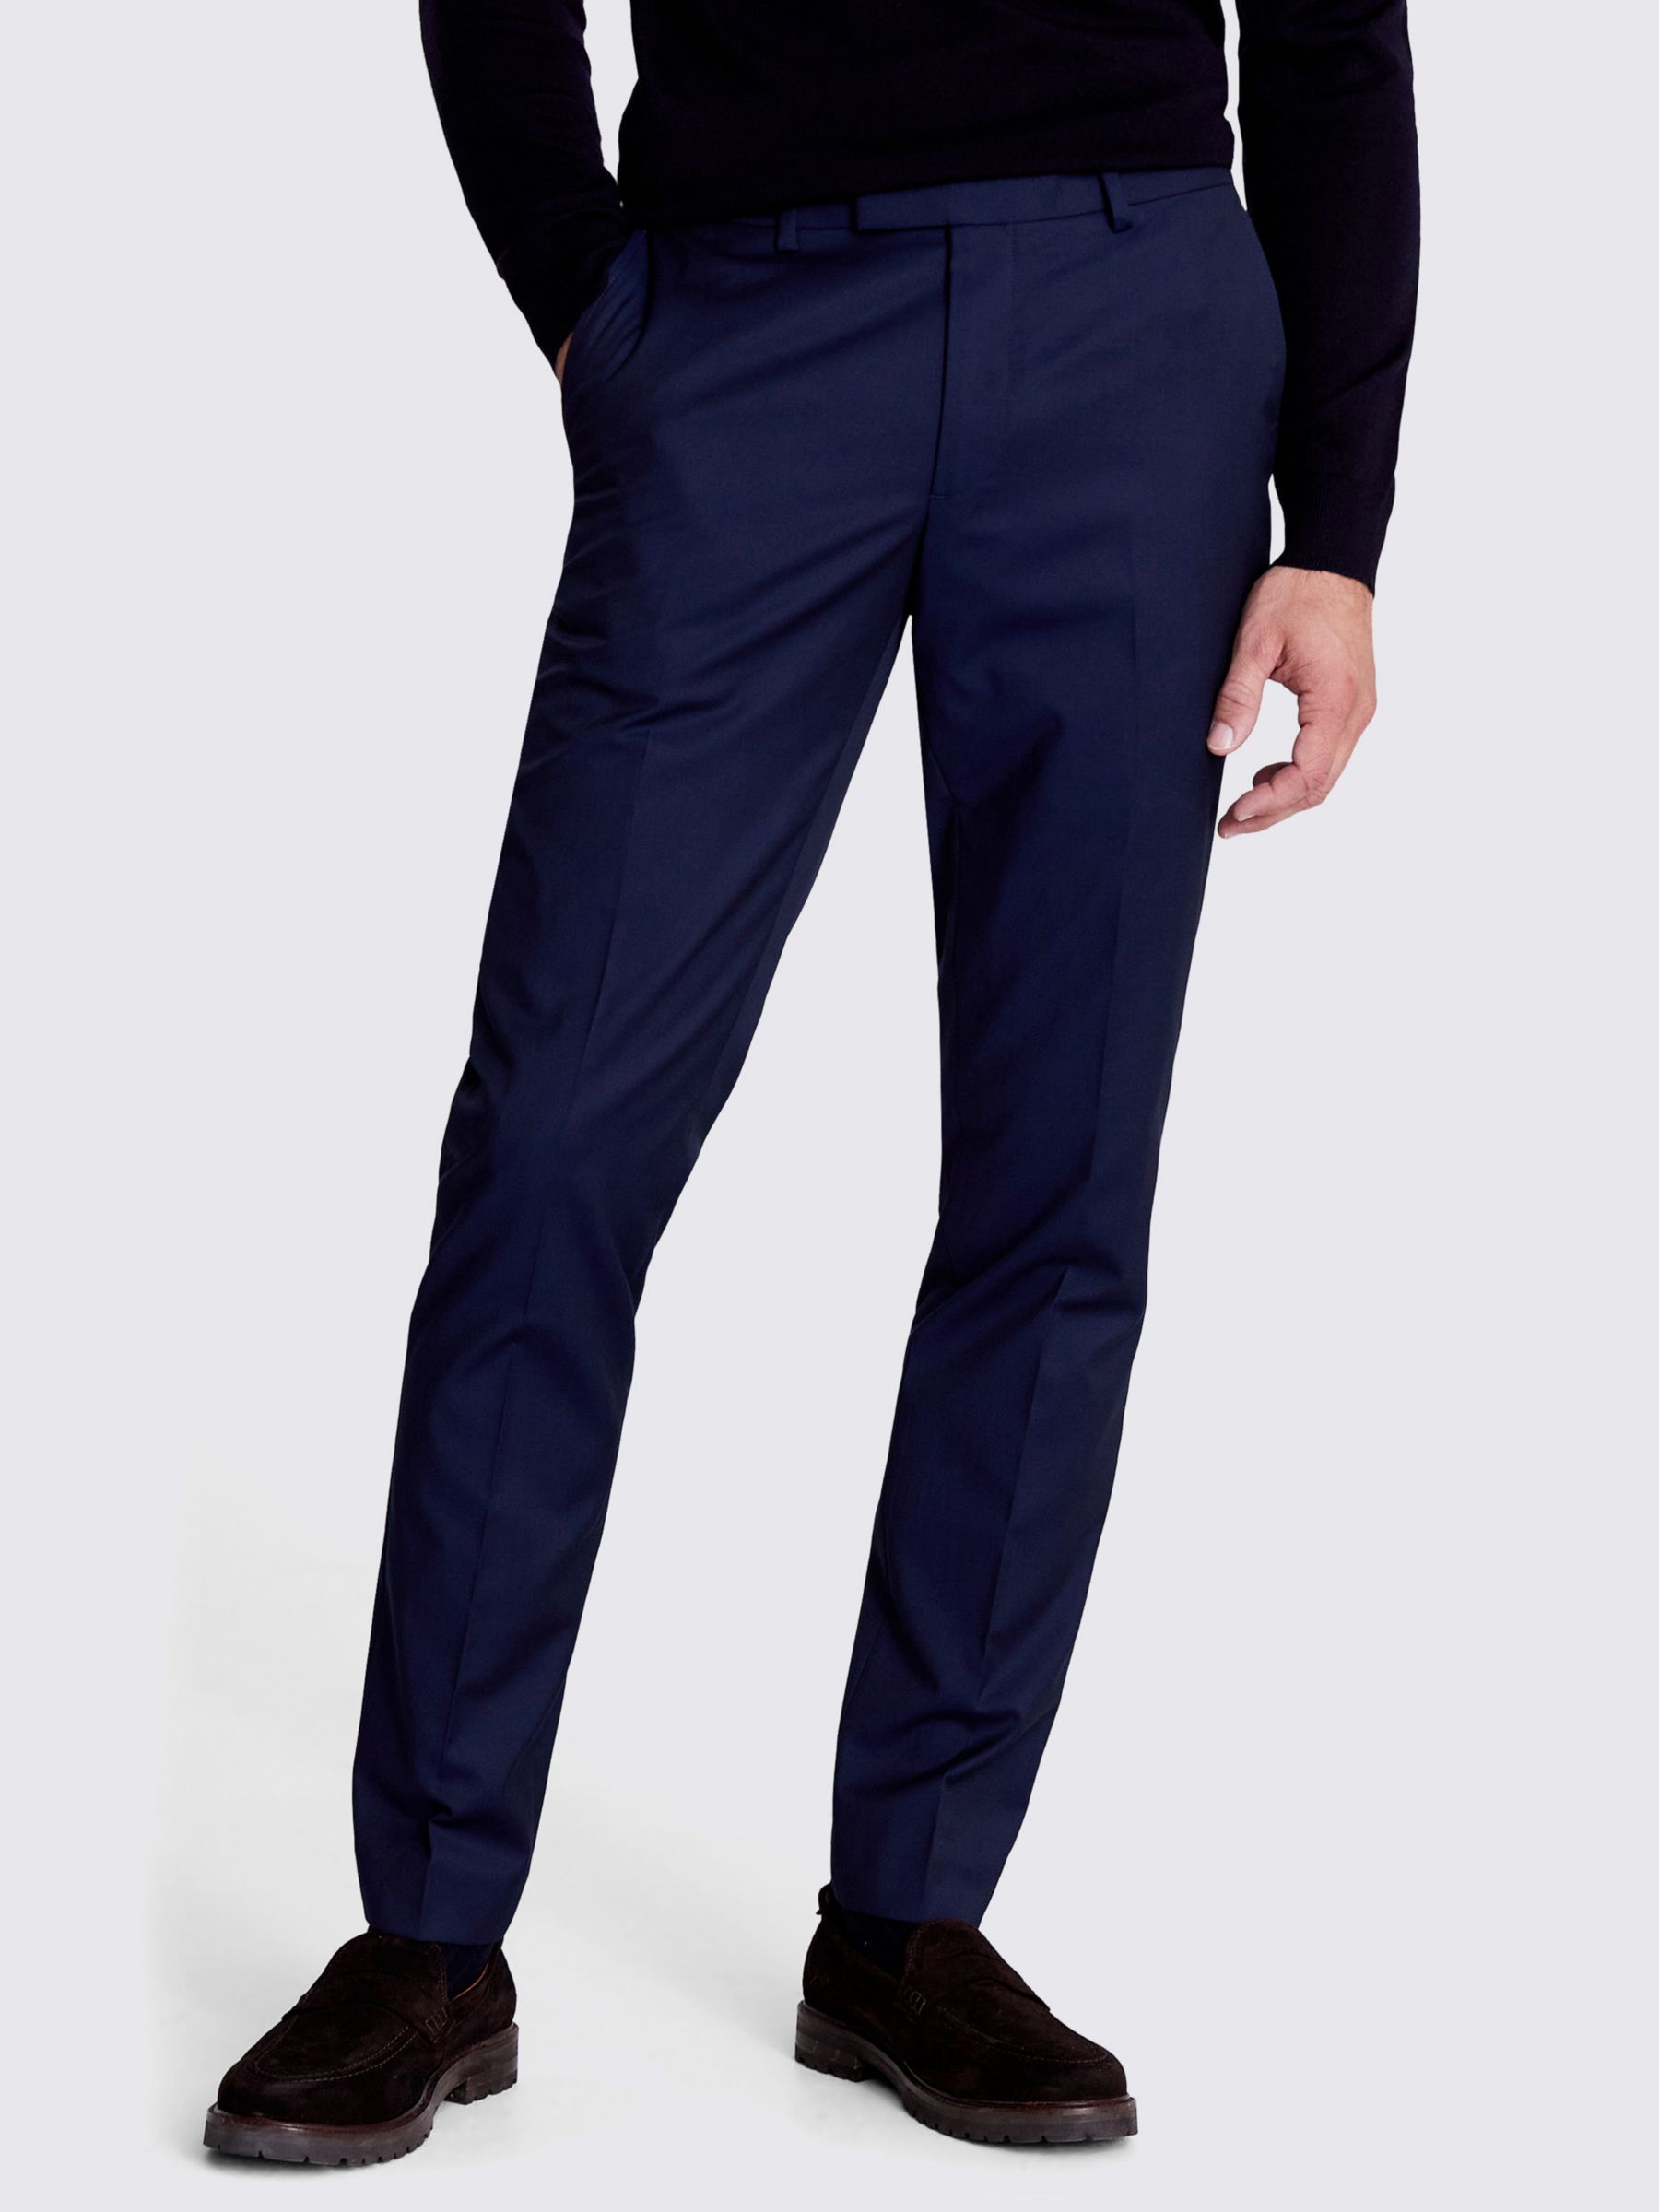 Moss Slim Fit Ink Stretch Trouser, Ink, 28S